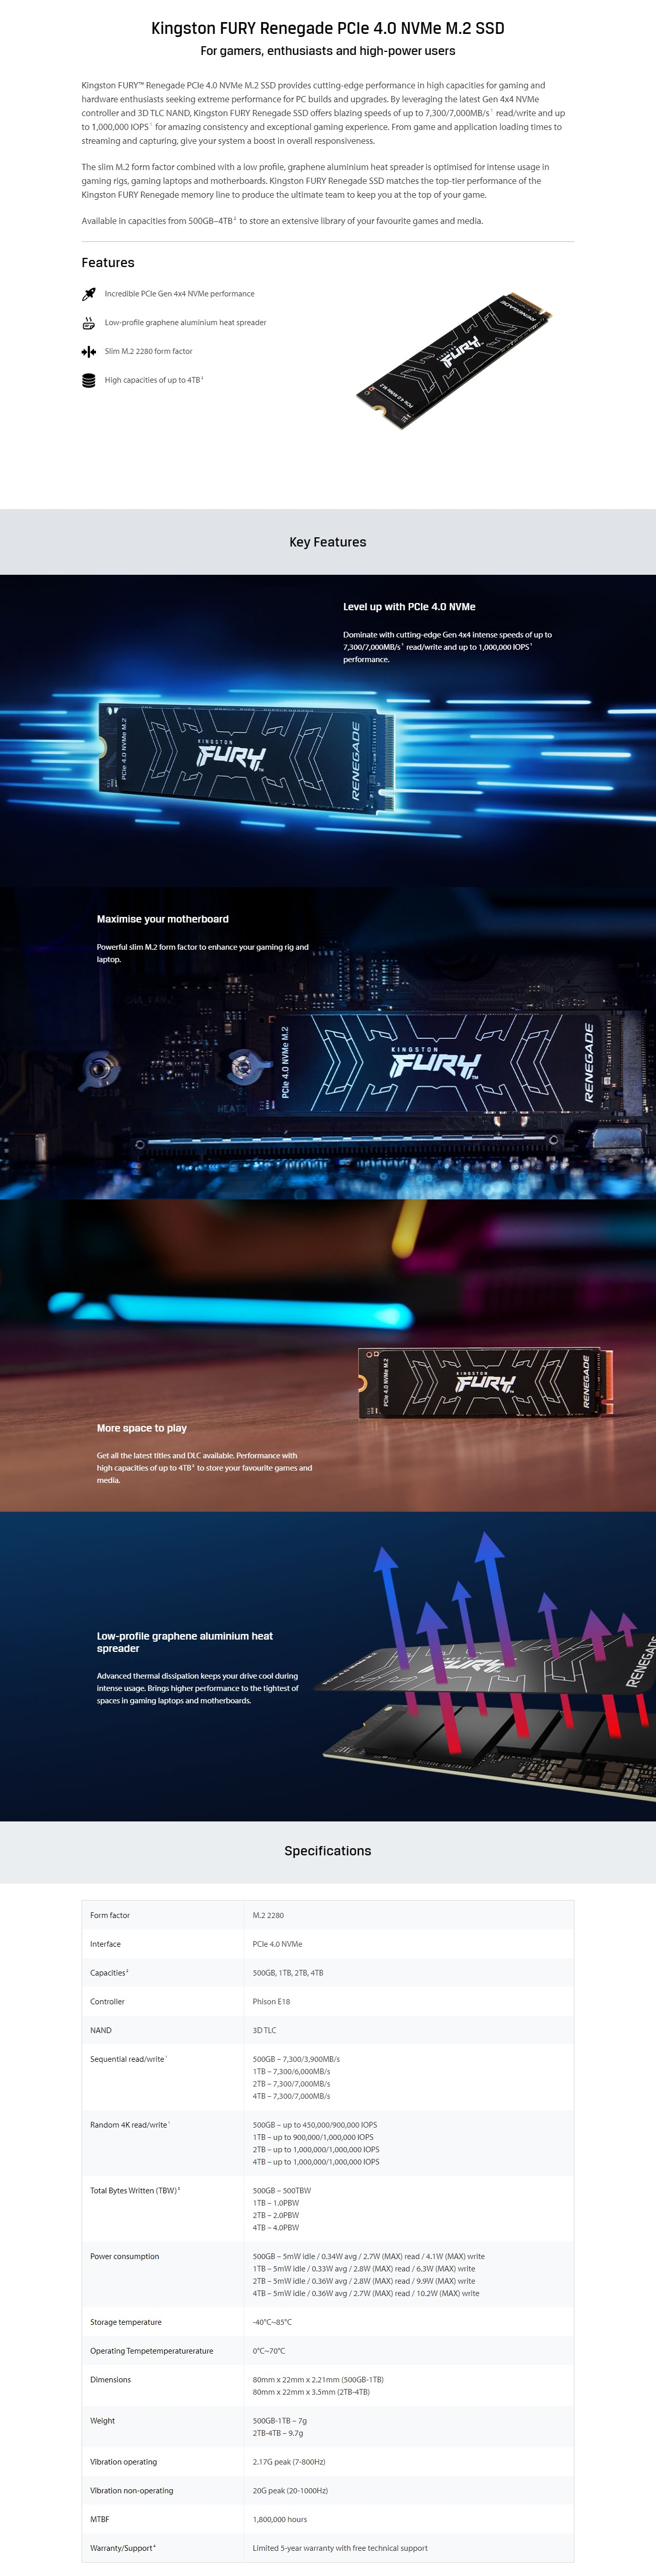 A large marketing image providing additional information about the product Kingston FURY Renegade PCIe Gen4 NVMe M.2 SSD - 4TB - Additional alt info not provided